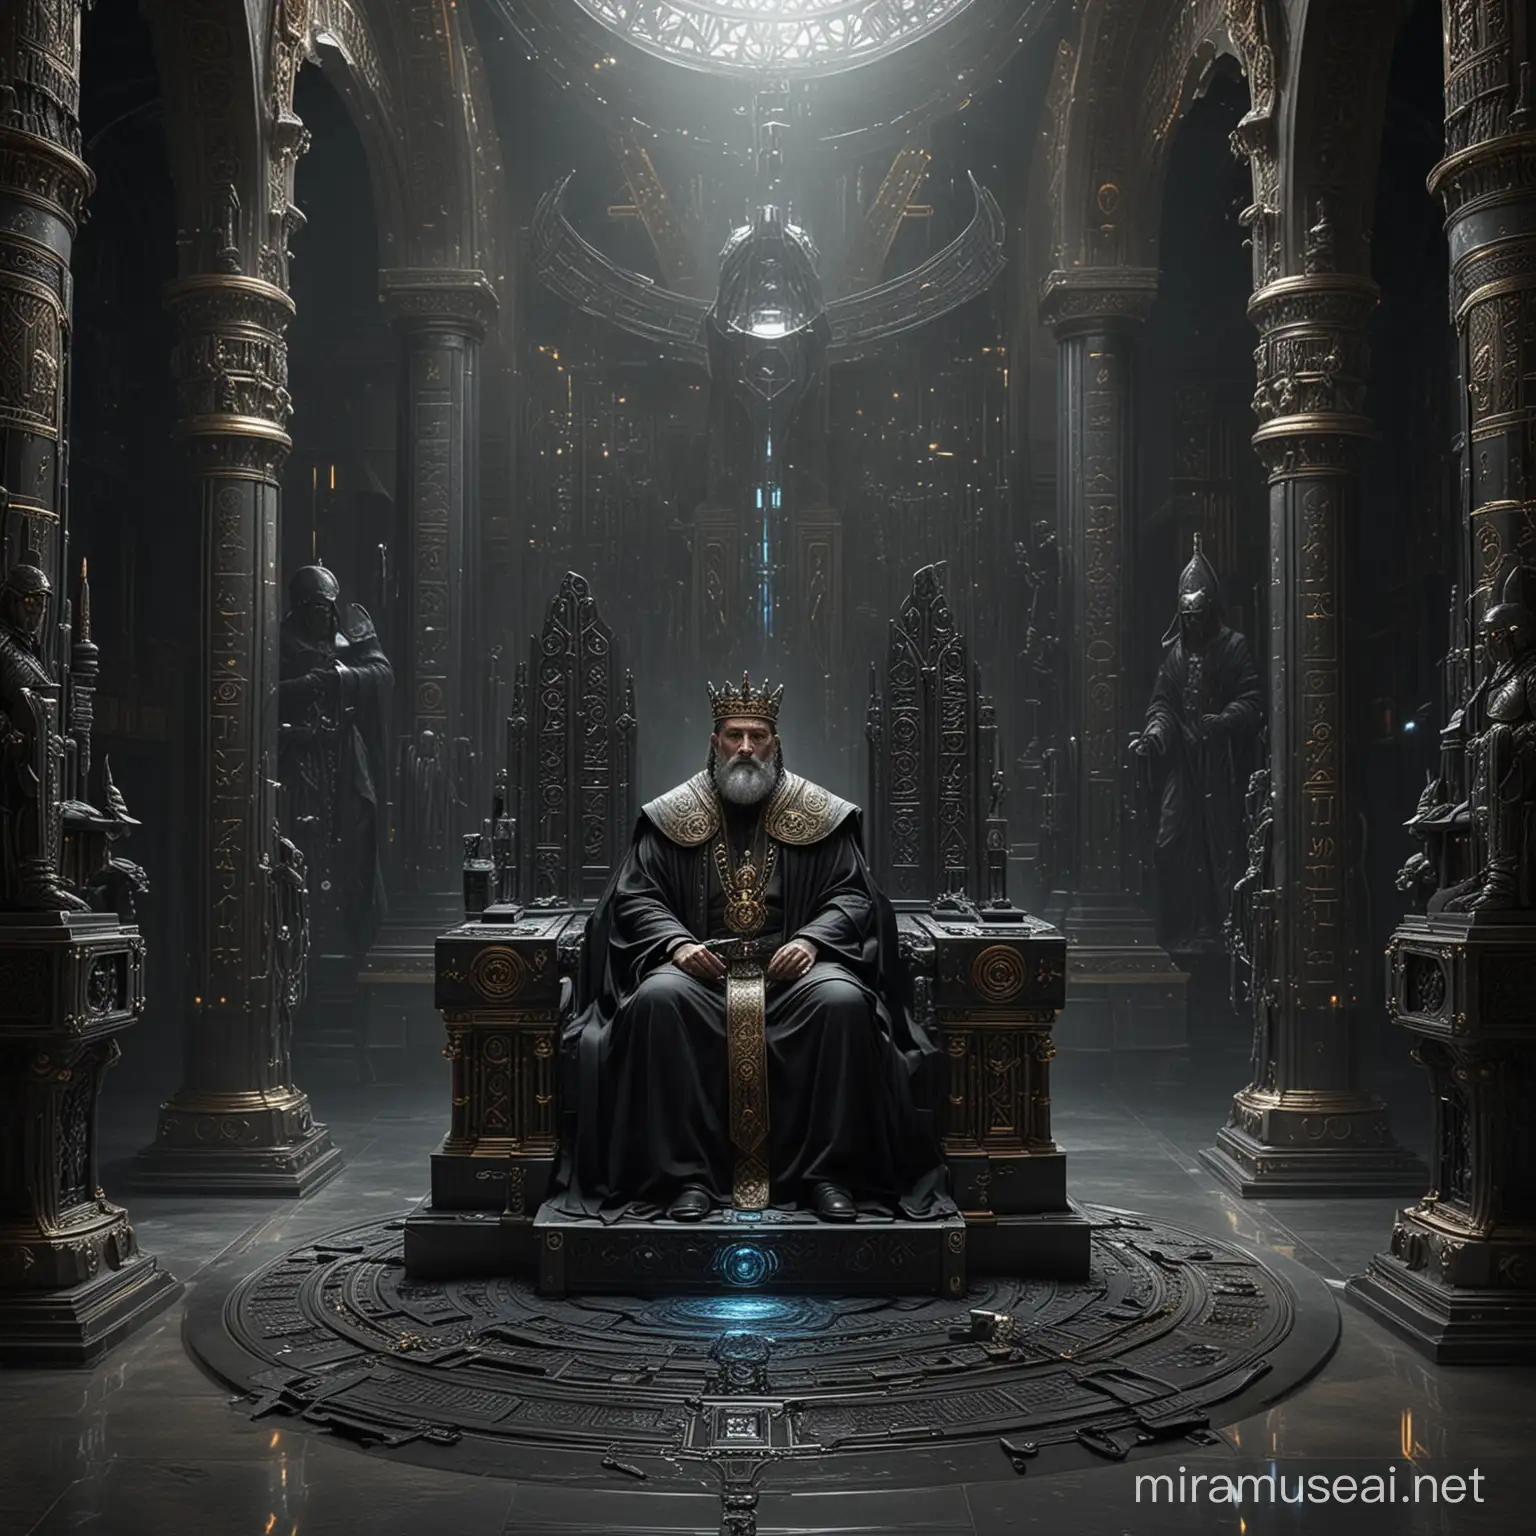 Hiperrealistic picture, In a futuristic cityscape blending medieval opulence with advanced technology, the King of the Pharisees sits upon a throne of polished obsidian, adorned with holographic symbols of authority. His robes shimmer with nanotech fabrics, while cybernetic enhancements augment his gaze. With a voice amplified by unseen technology, he commands his courtiers in a chamber where ancient scriptures intertwine with hovering drones, embodying a figure of tradition and futurism in equal measure.